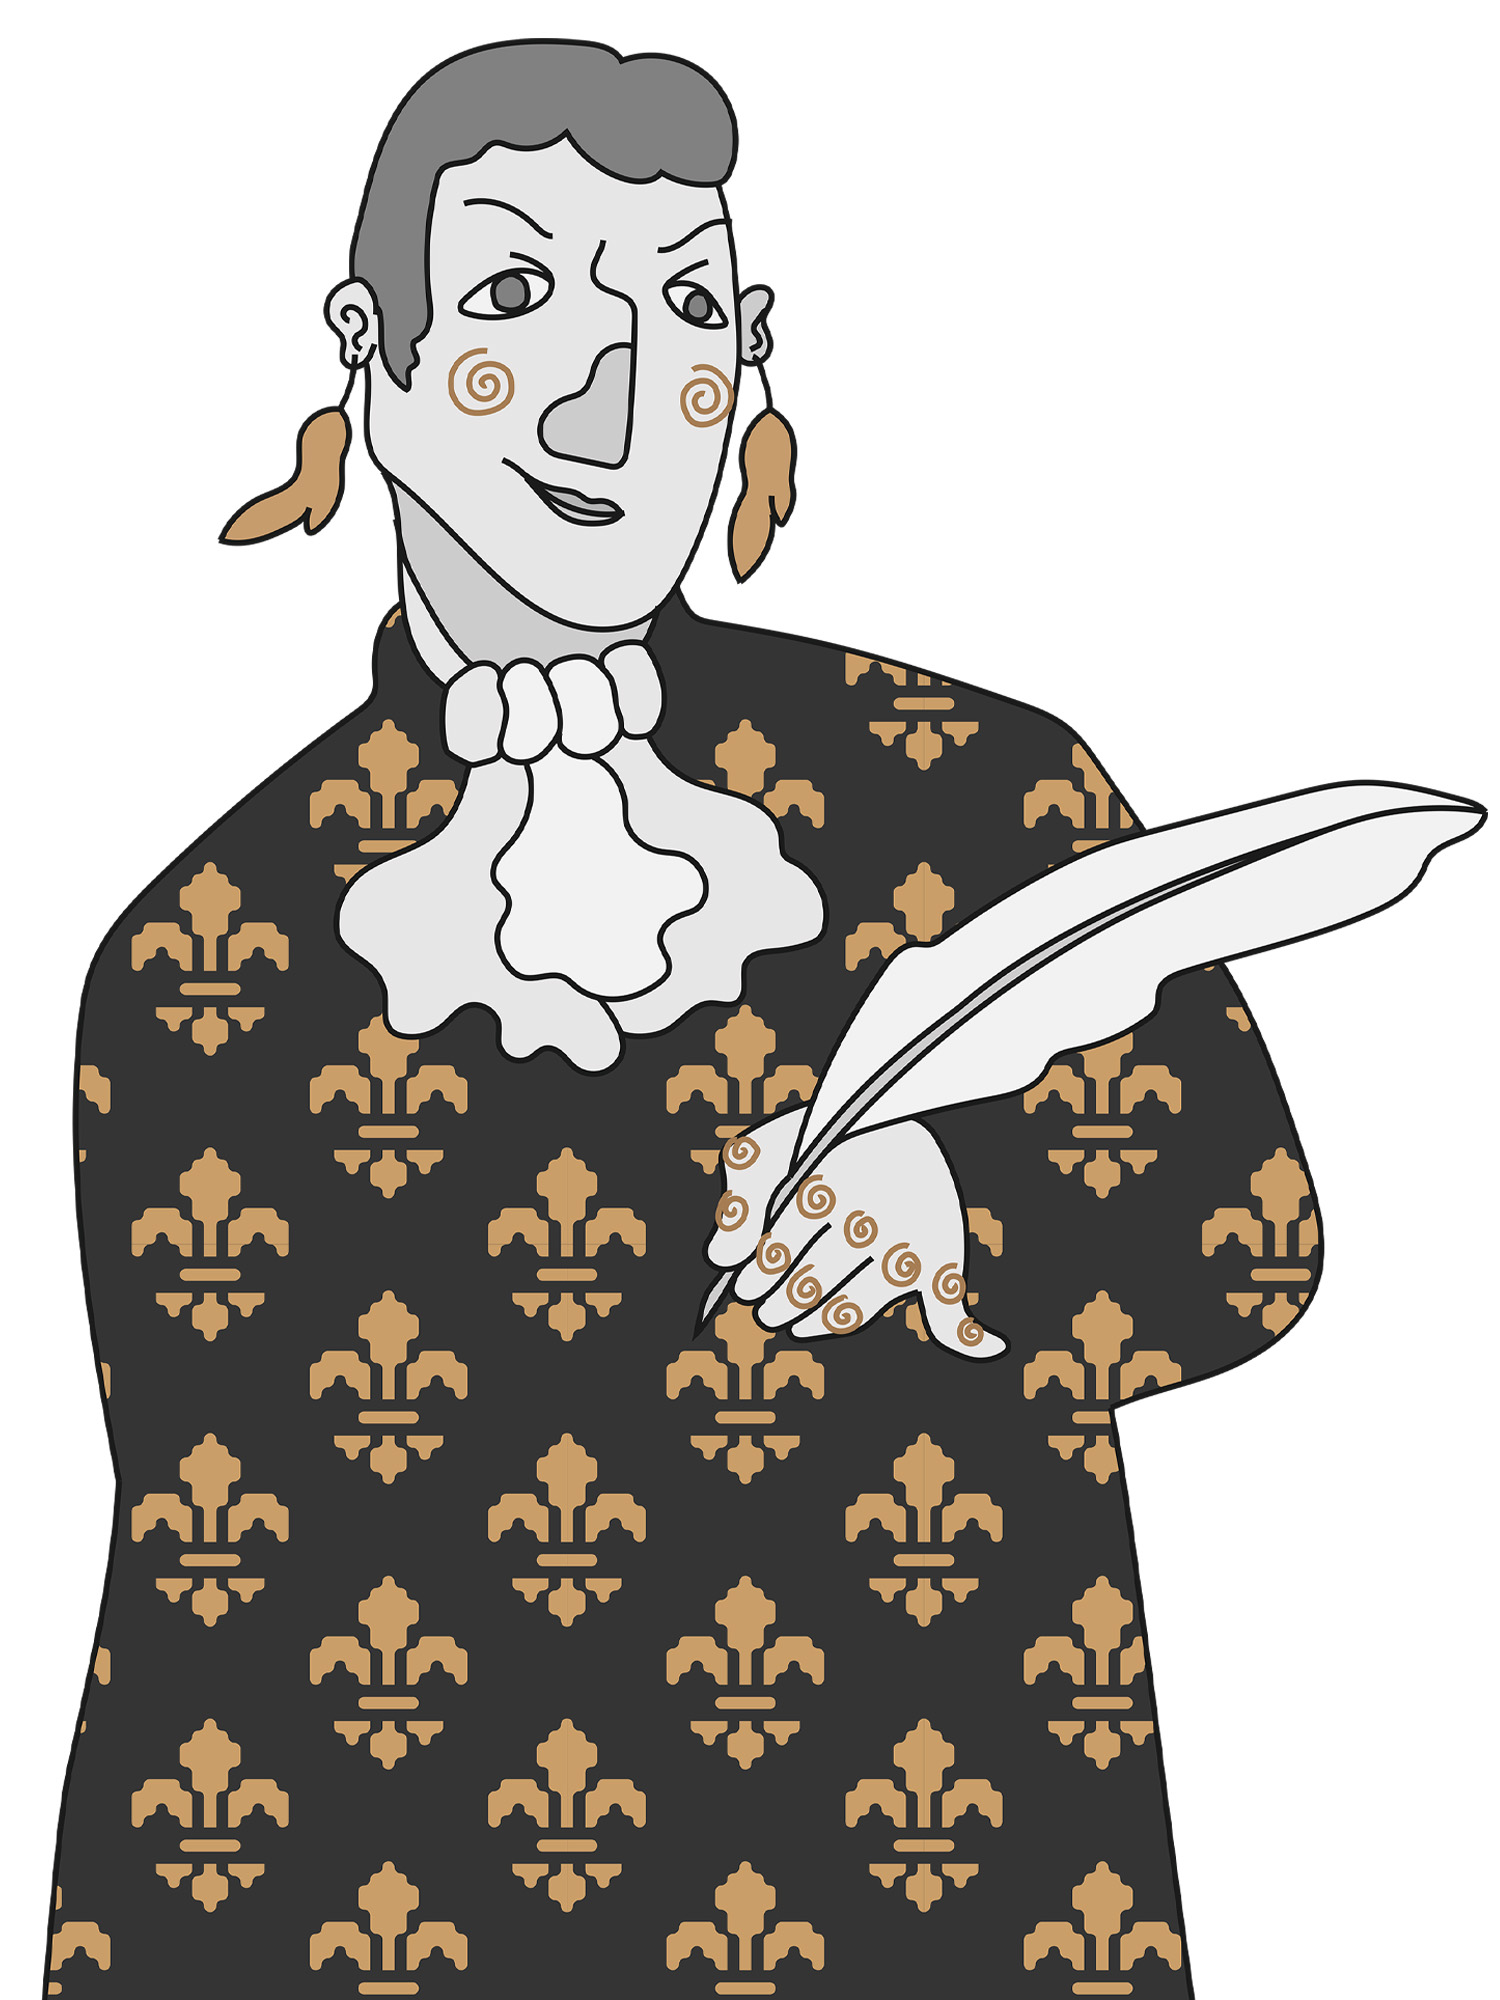 Illustrated French man wearing patterned clothes and carrying a feather in his hand